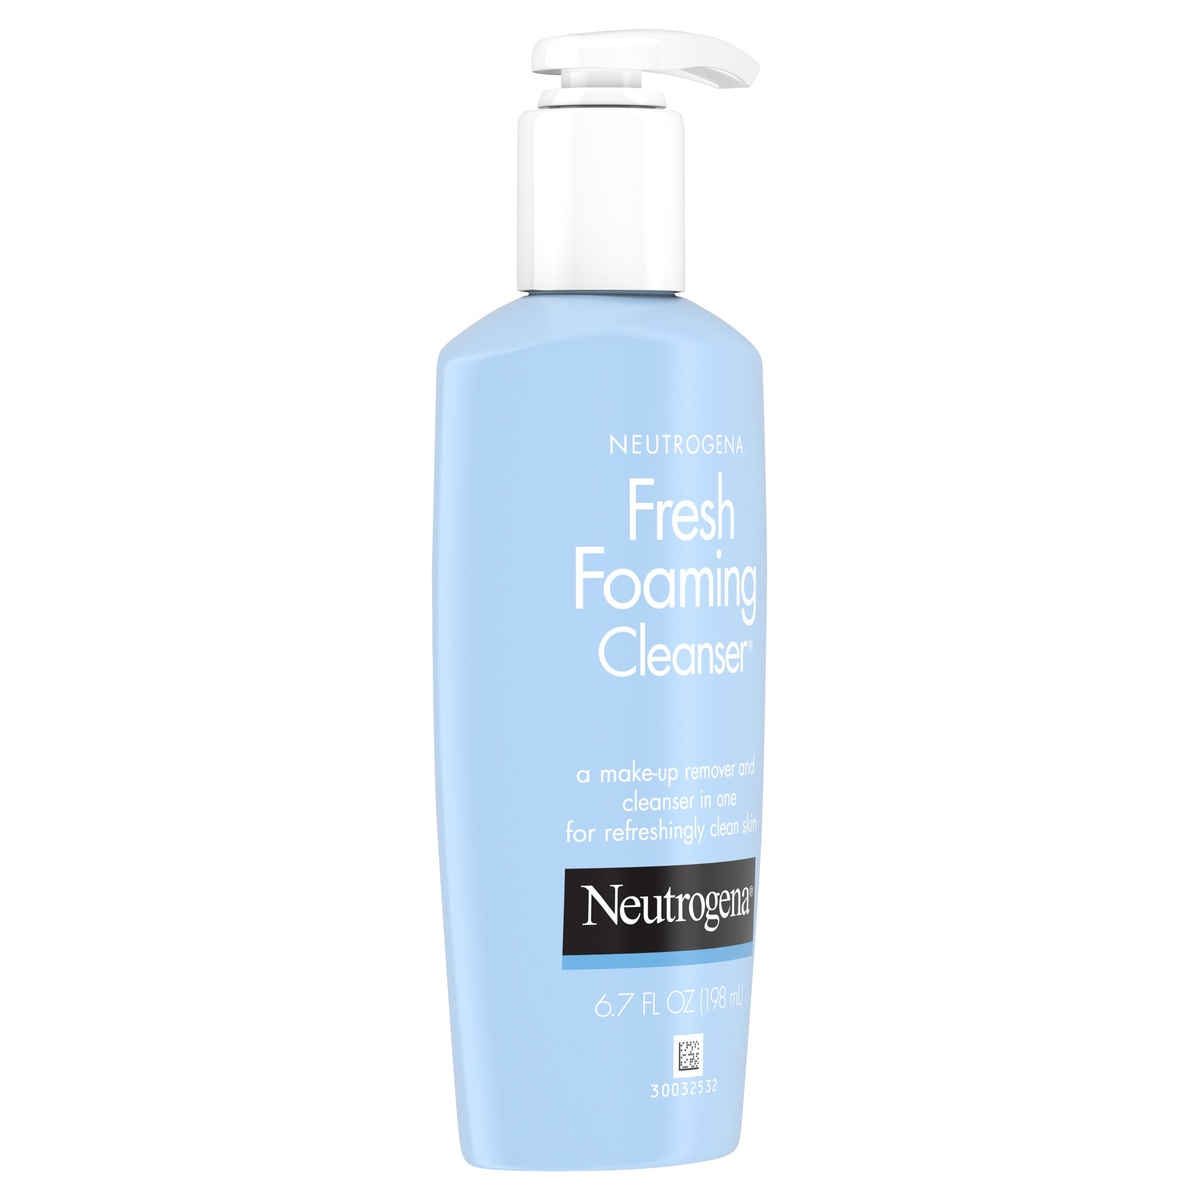 slide 2 of 6, Neutrogena Fresh Foaming Facial Cleanser & Makeup Remover with Glycerin, Oil-, Soap- & Alcohol-Free Daily Face Wash Removes Dirt, Oil & Waterproof Makeup, Non-Comedogenic & Hypoallergenic, 6.7 fl oz